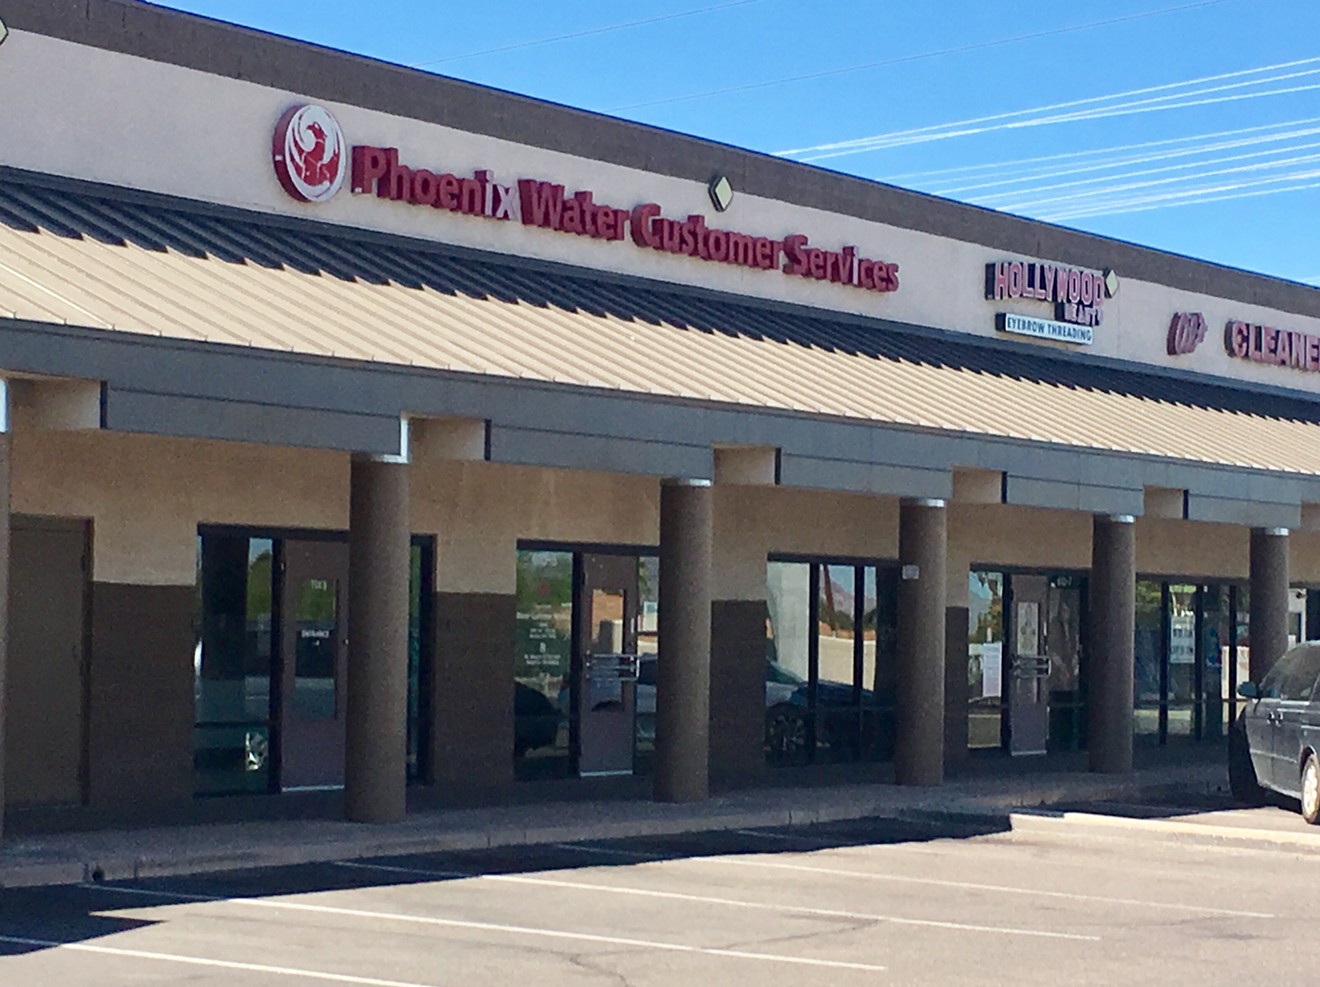 Several reports of harassment, retaliation, and favoritism at the Phoenix Water Services Department have surfaced this year.